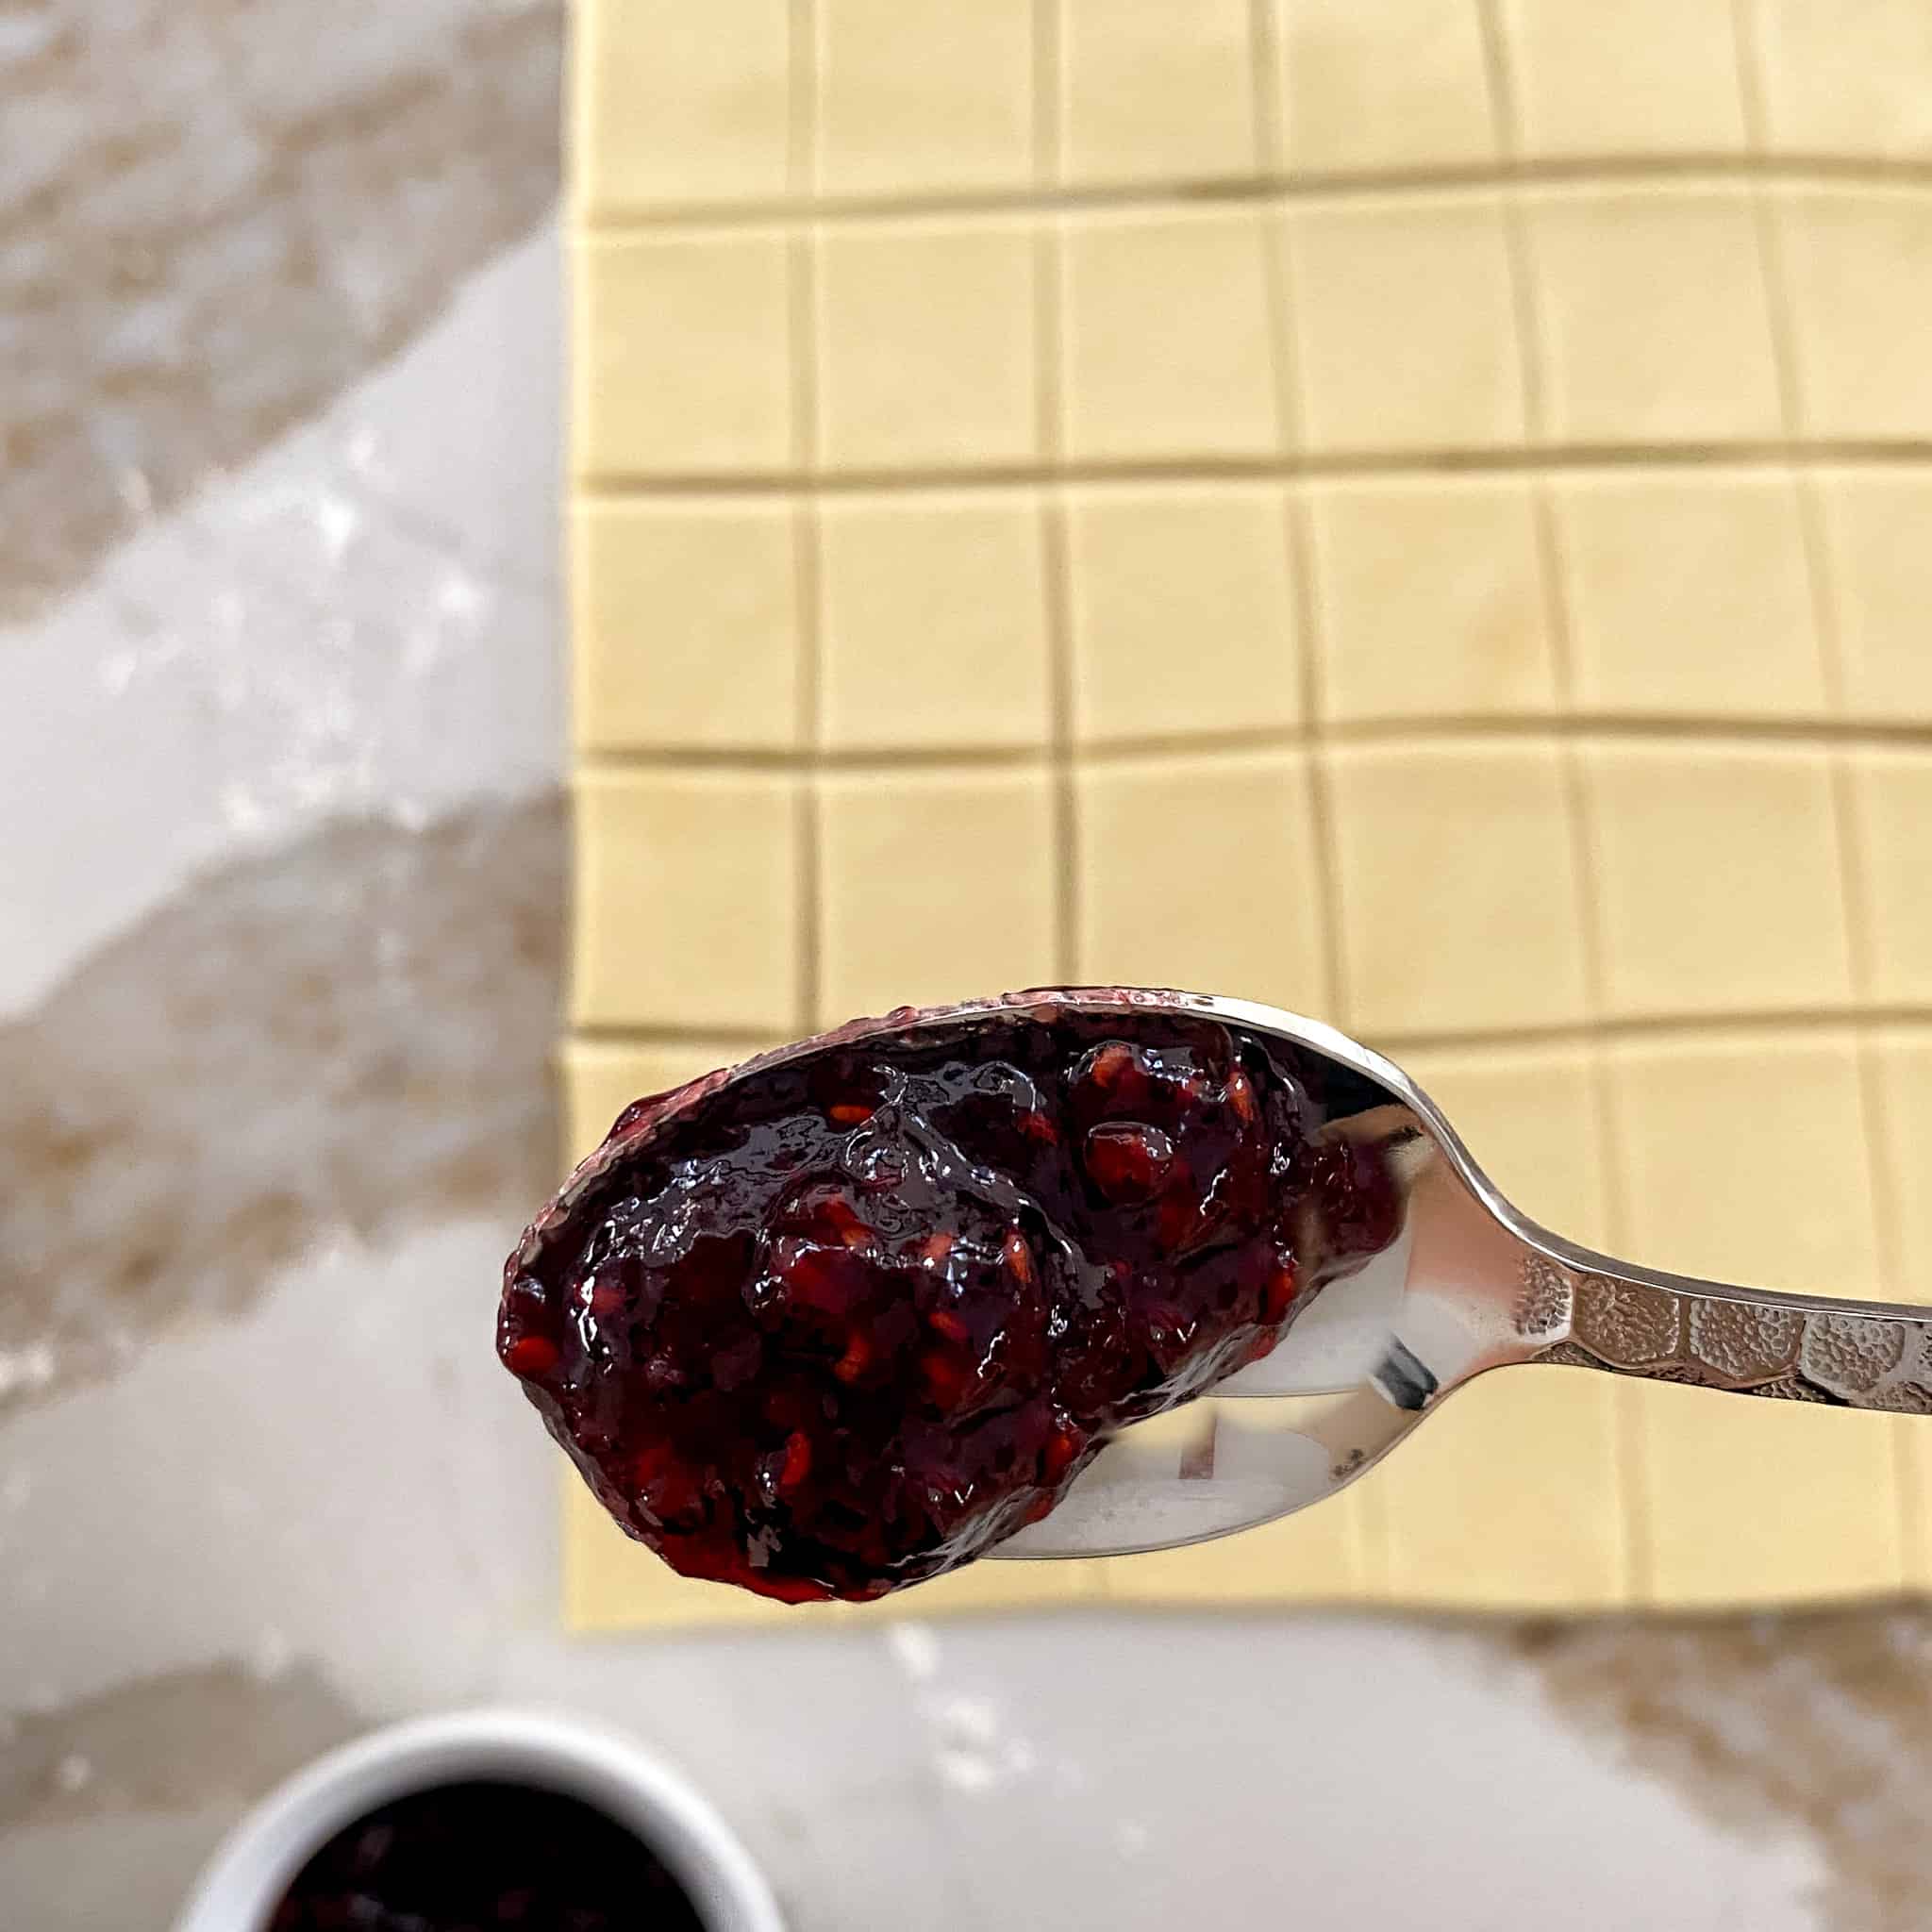 Thick raspberry jam staying on a tipped spoon above cut up dough.